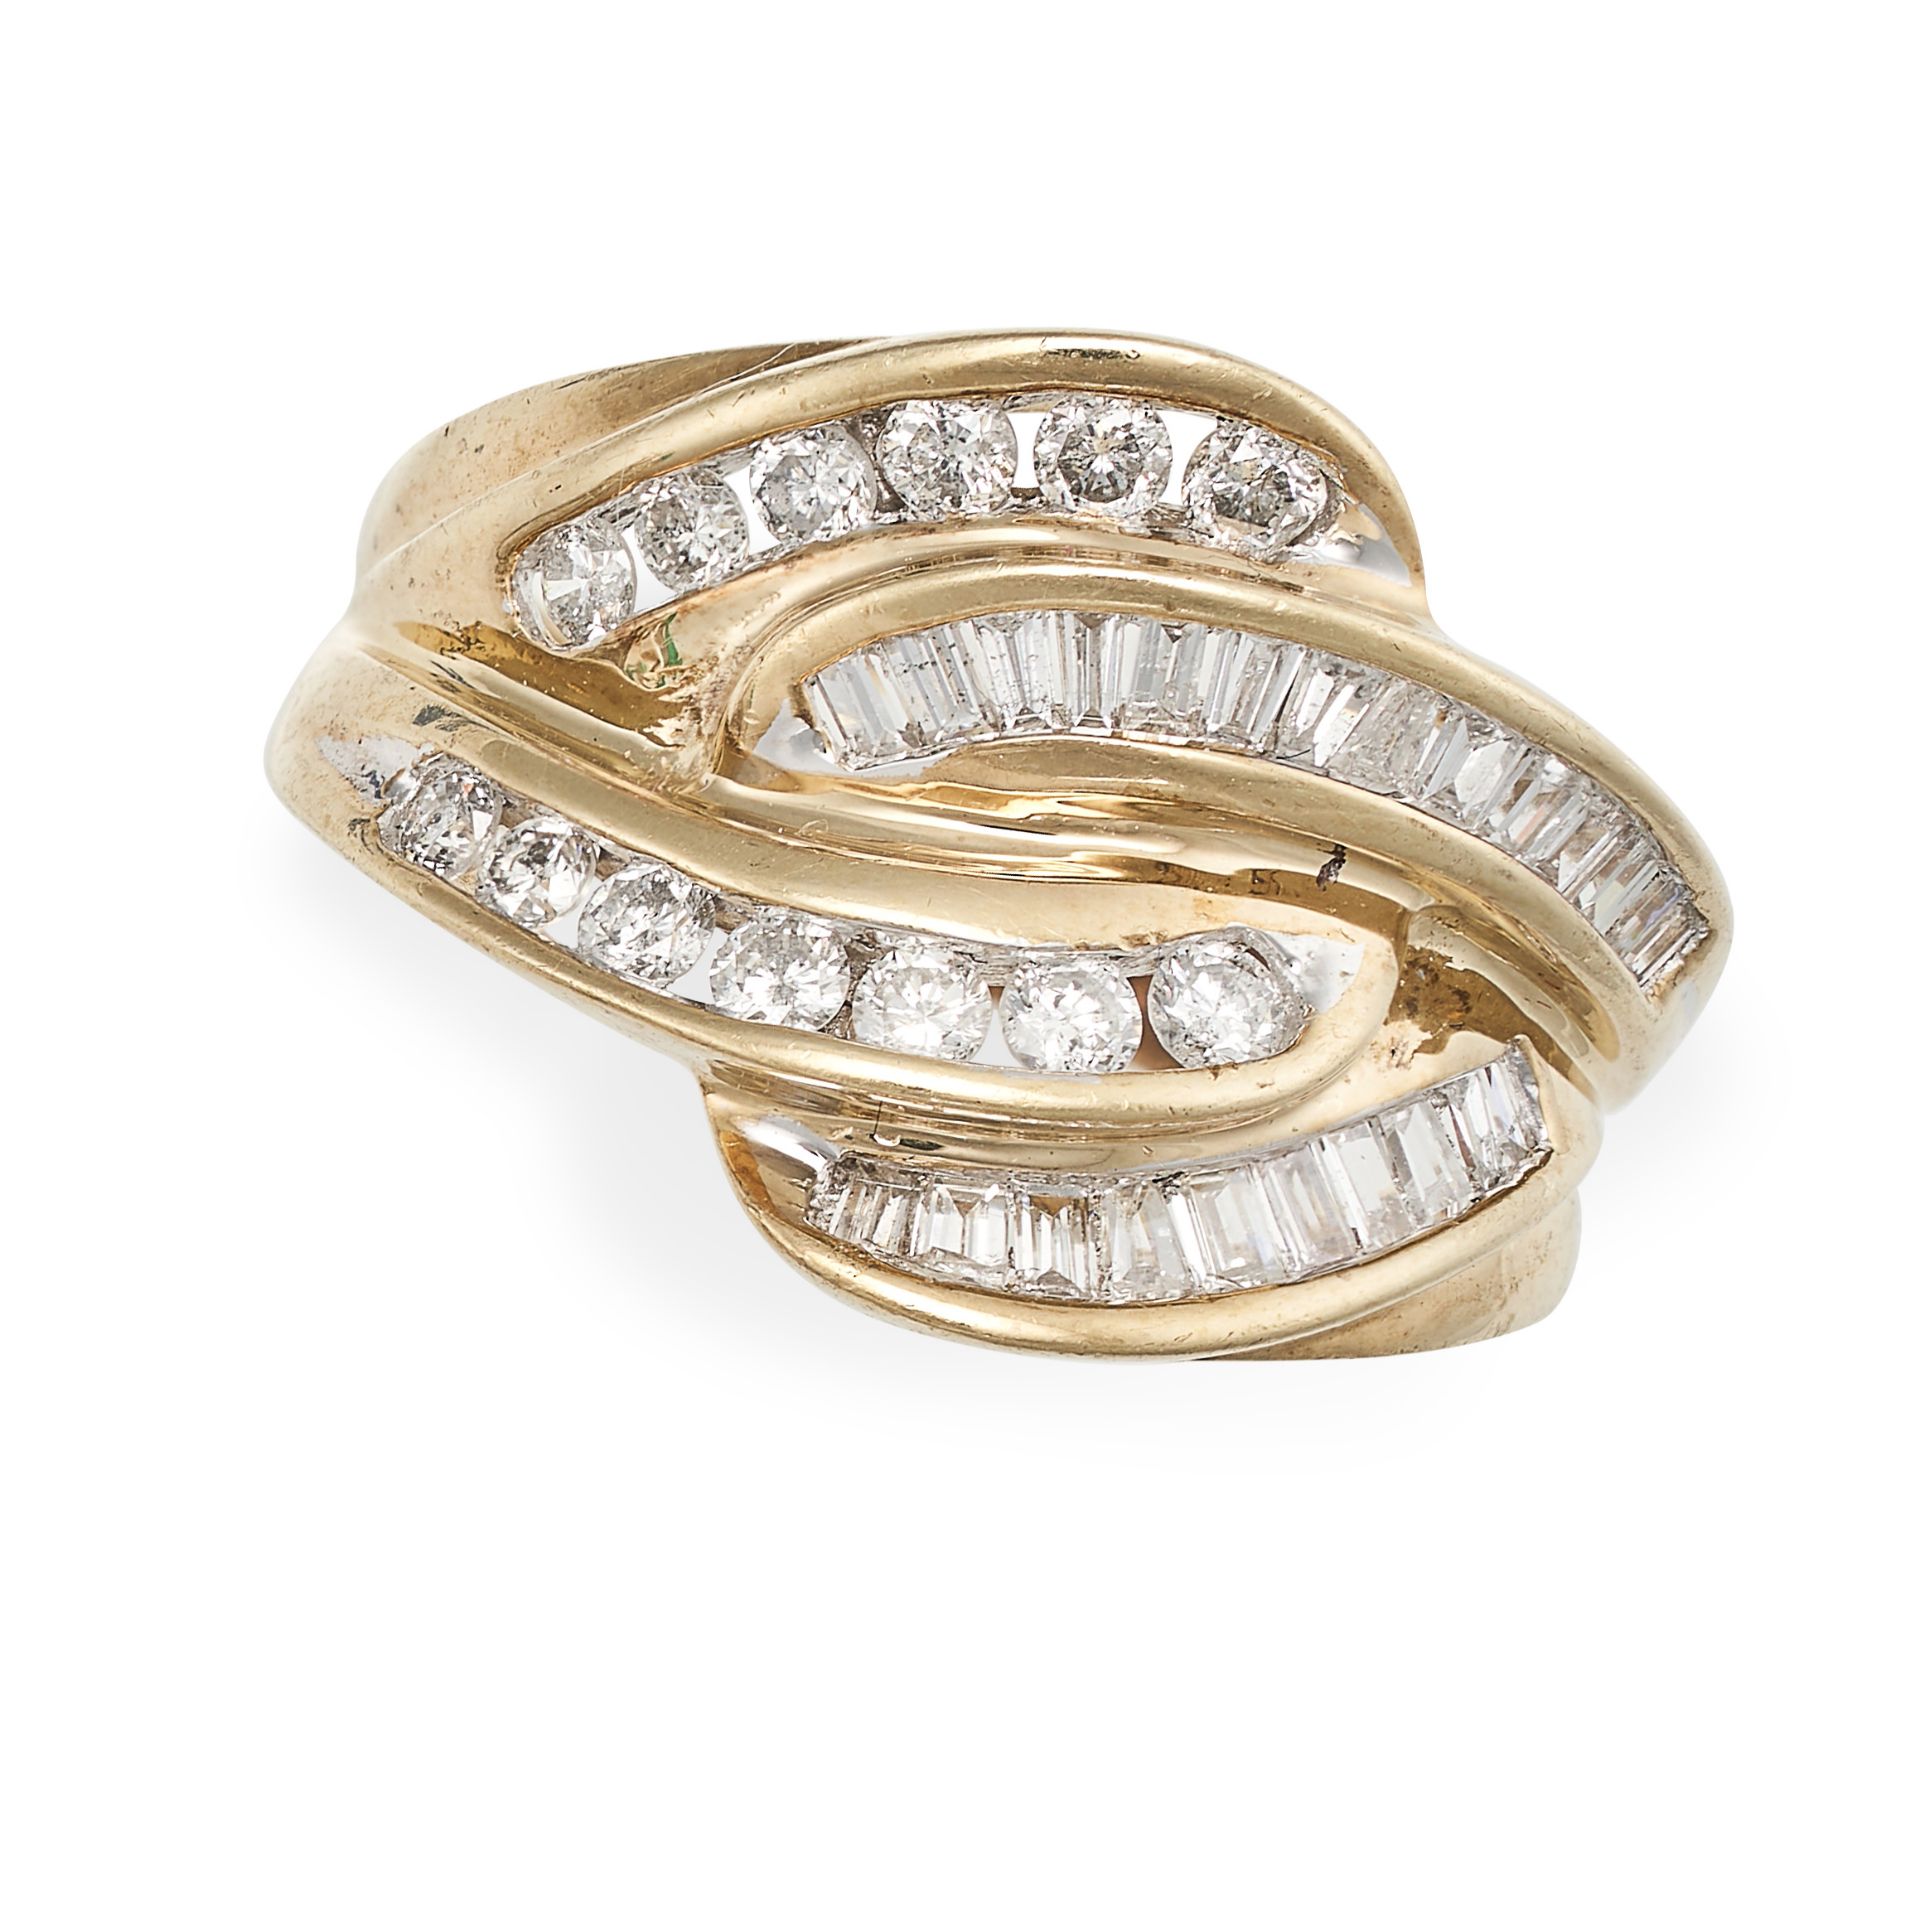 A DIAMOND RING in scrolling design set with round brilliant and baguette cut diamonds, no assay m...